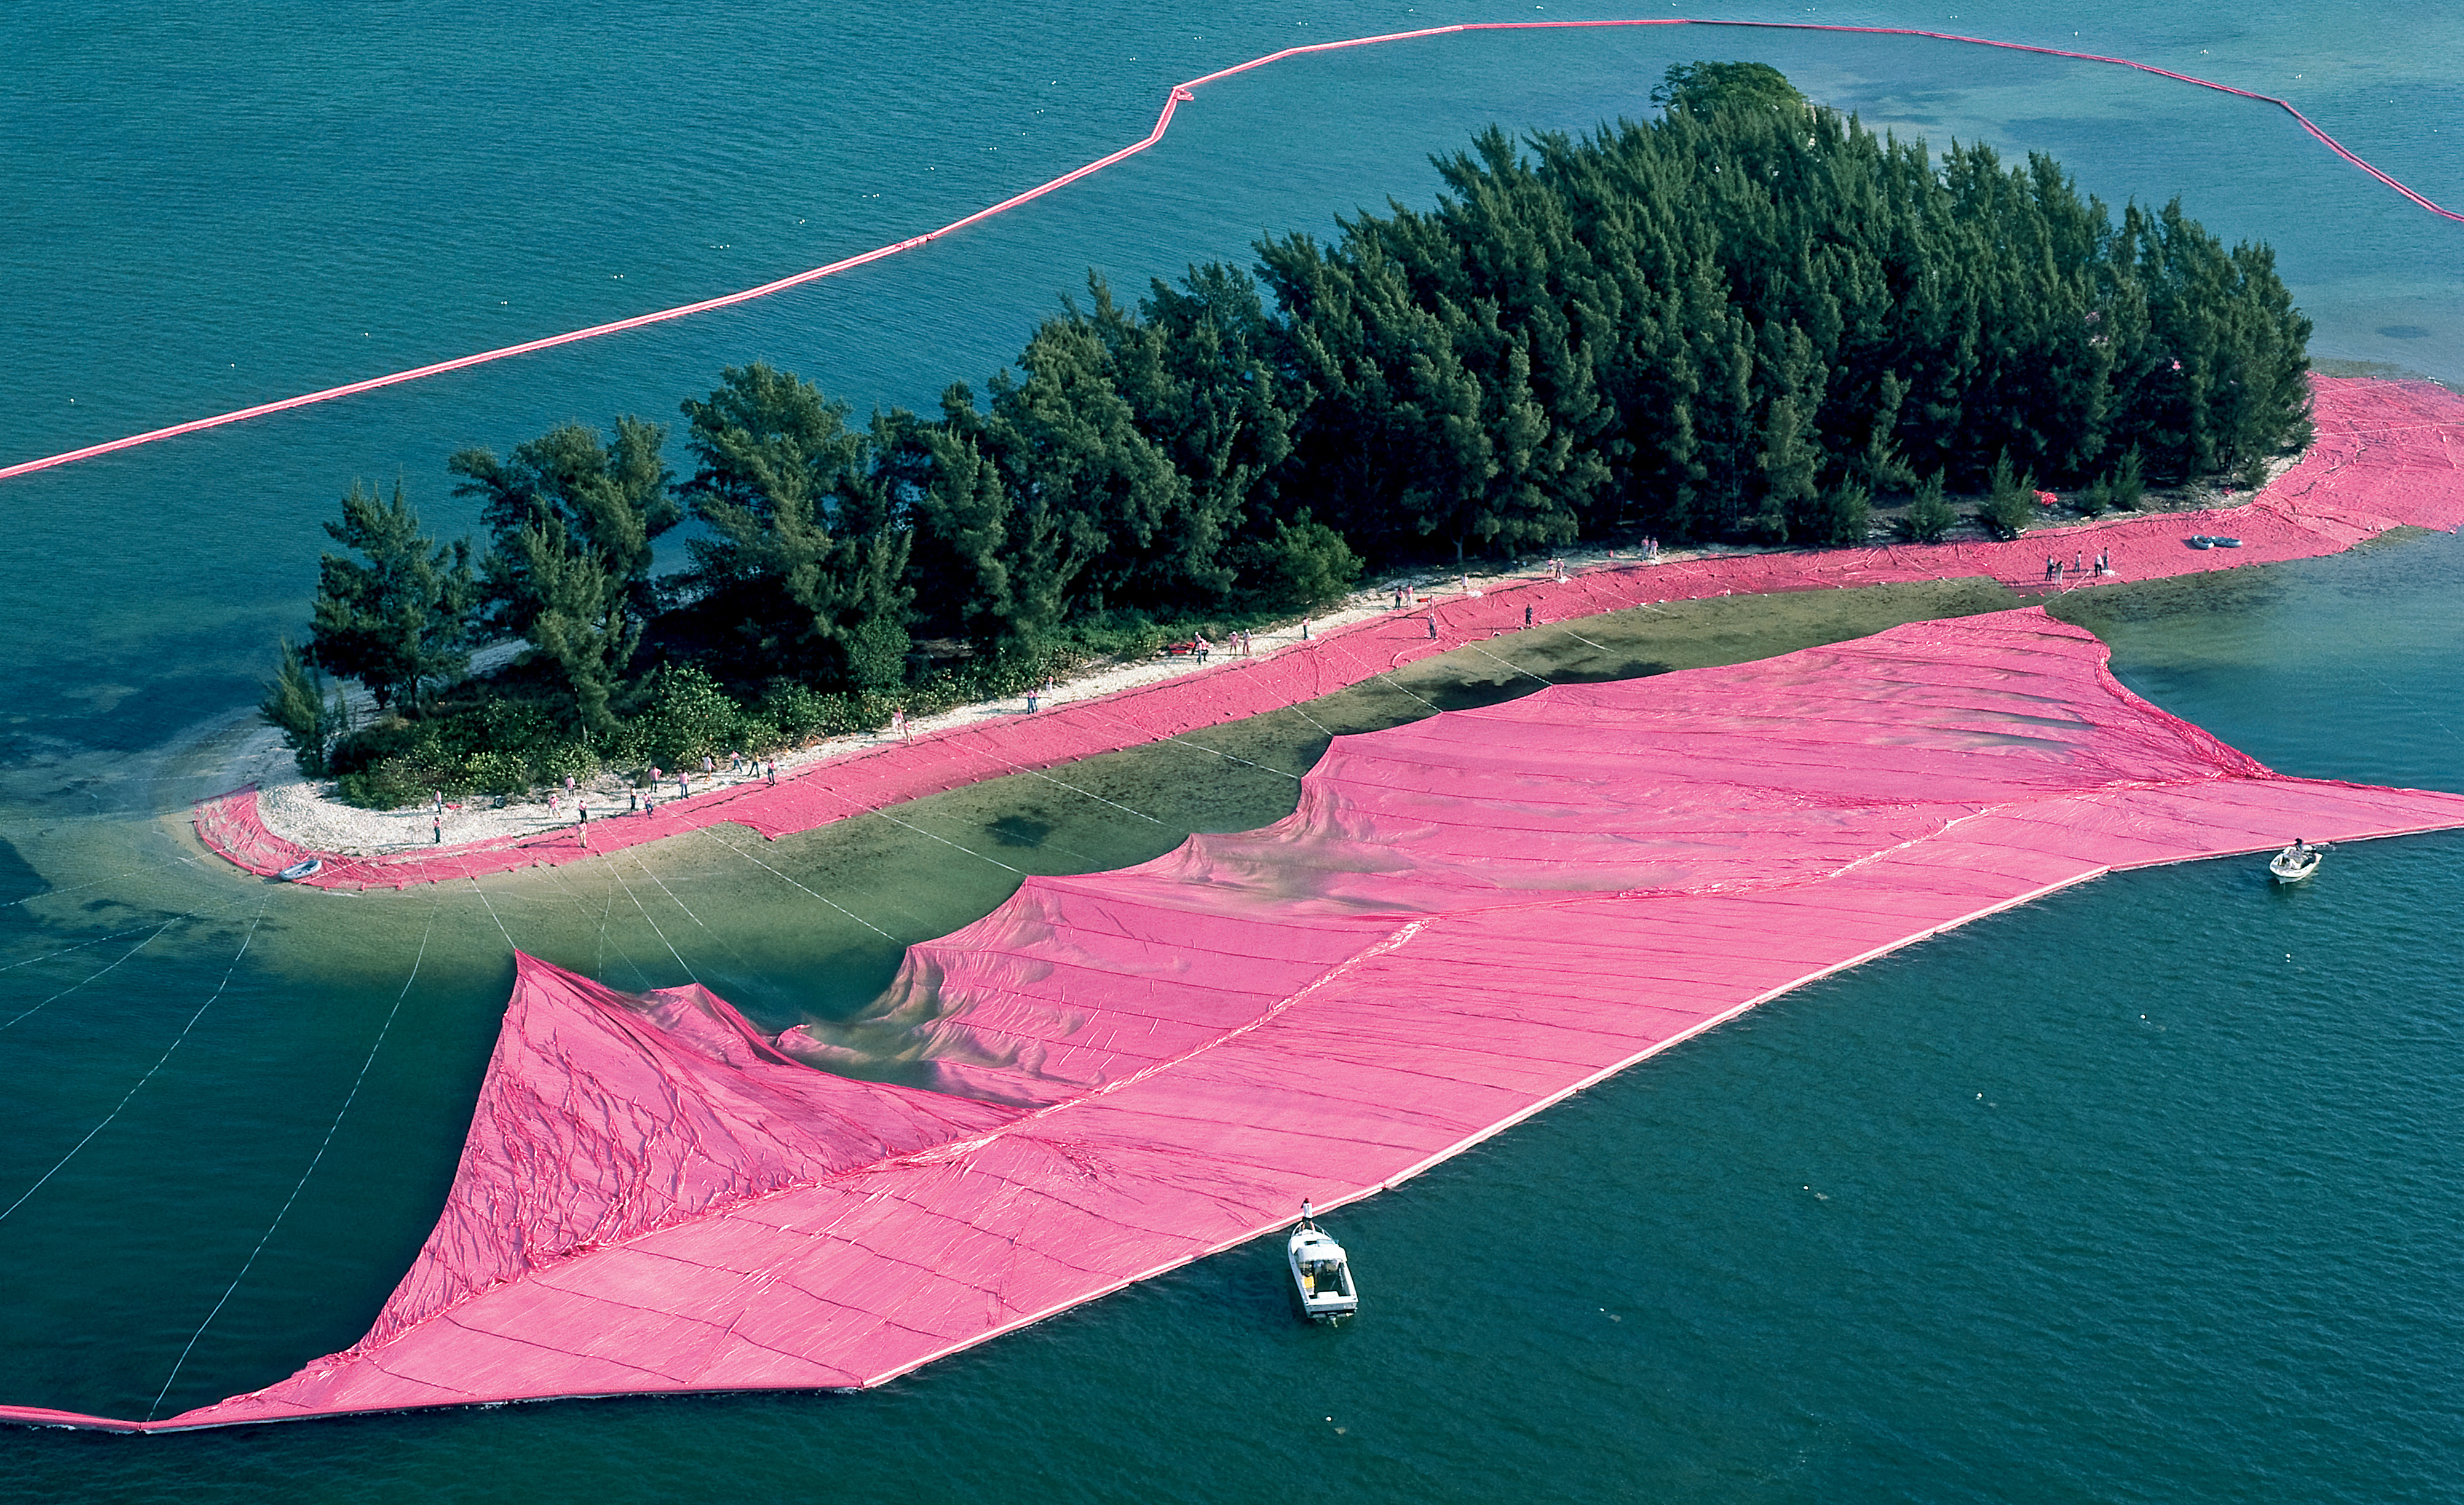 A documentary photograph of Christo and Jeanne-Claude’s Surrounded Islands, installed around the islands of Biscayne Bay in 1983.